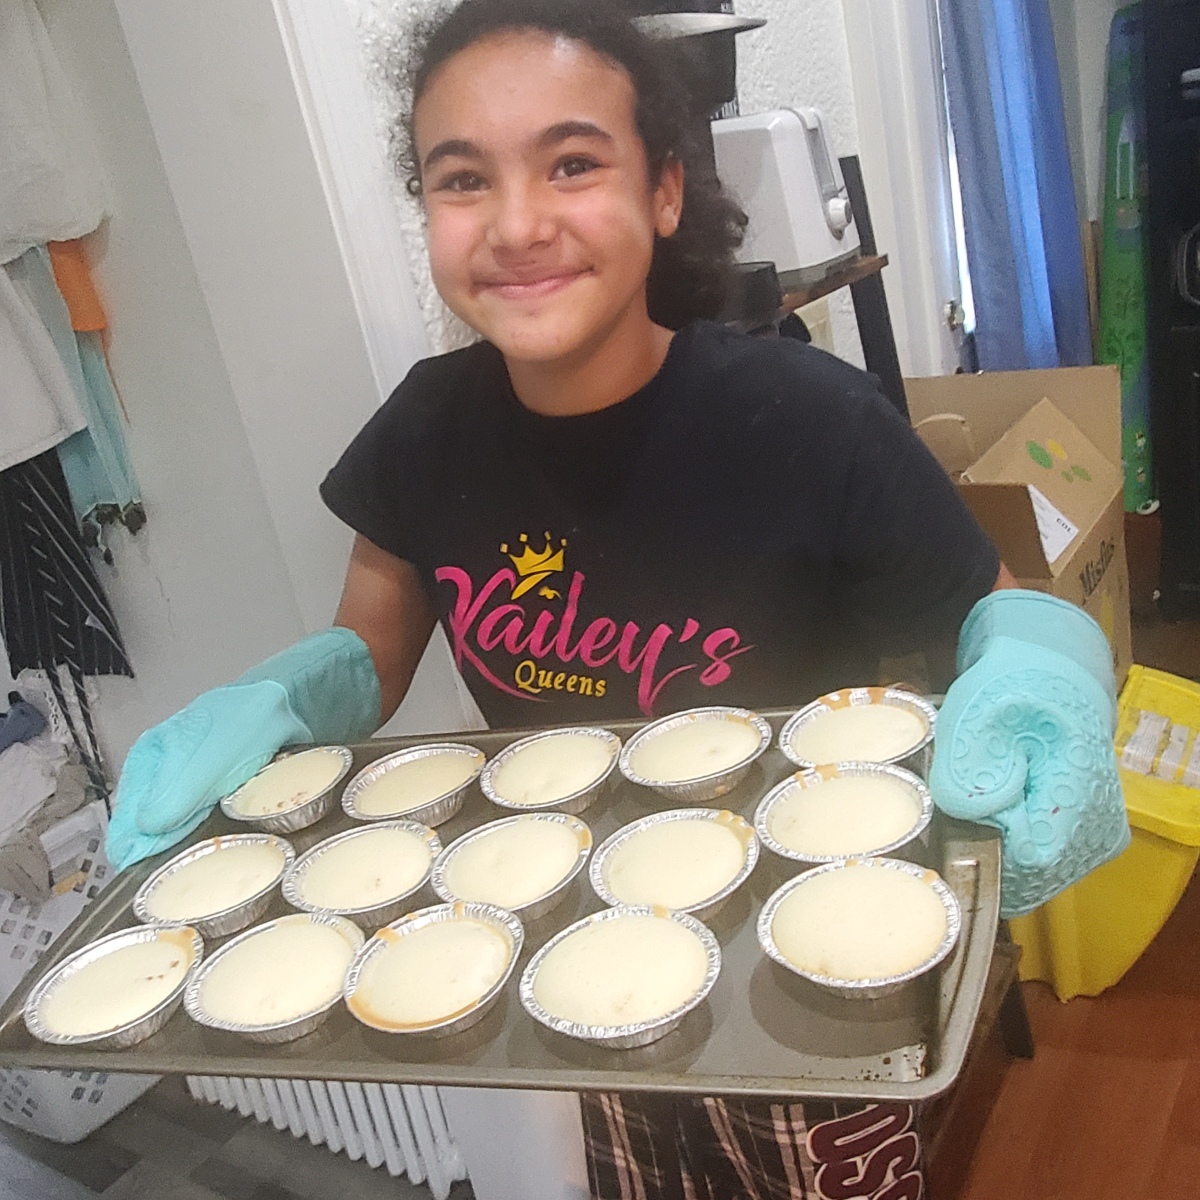 Baking Camp at Kailey’s Queens